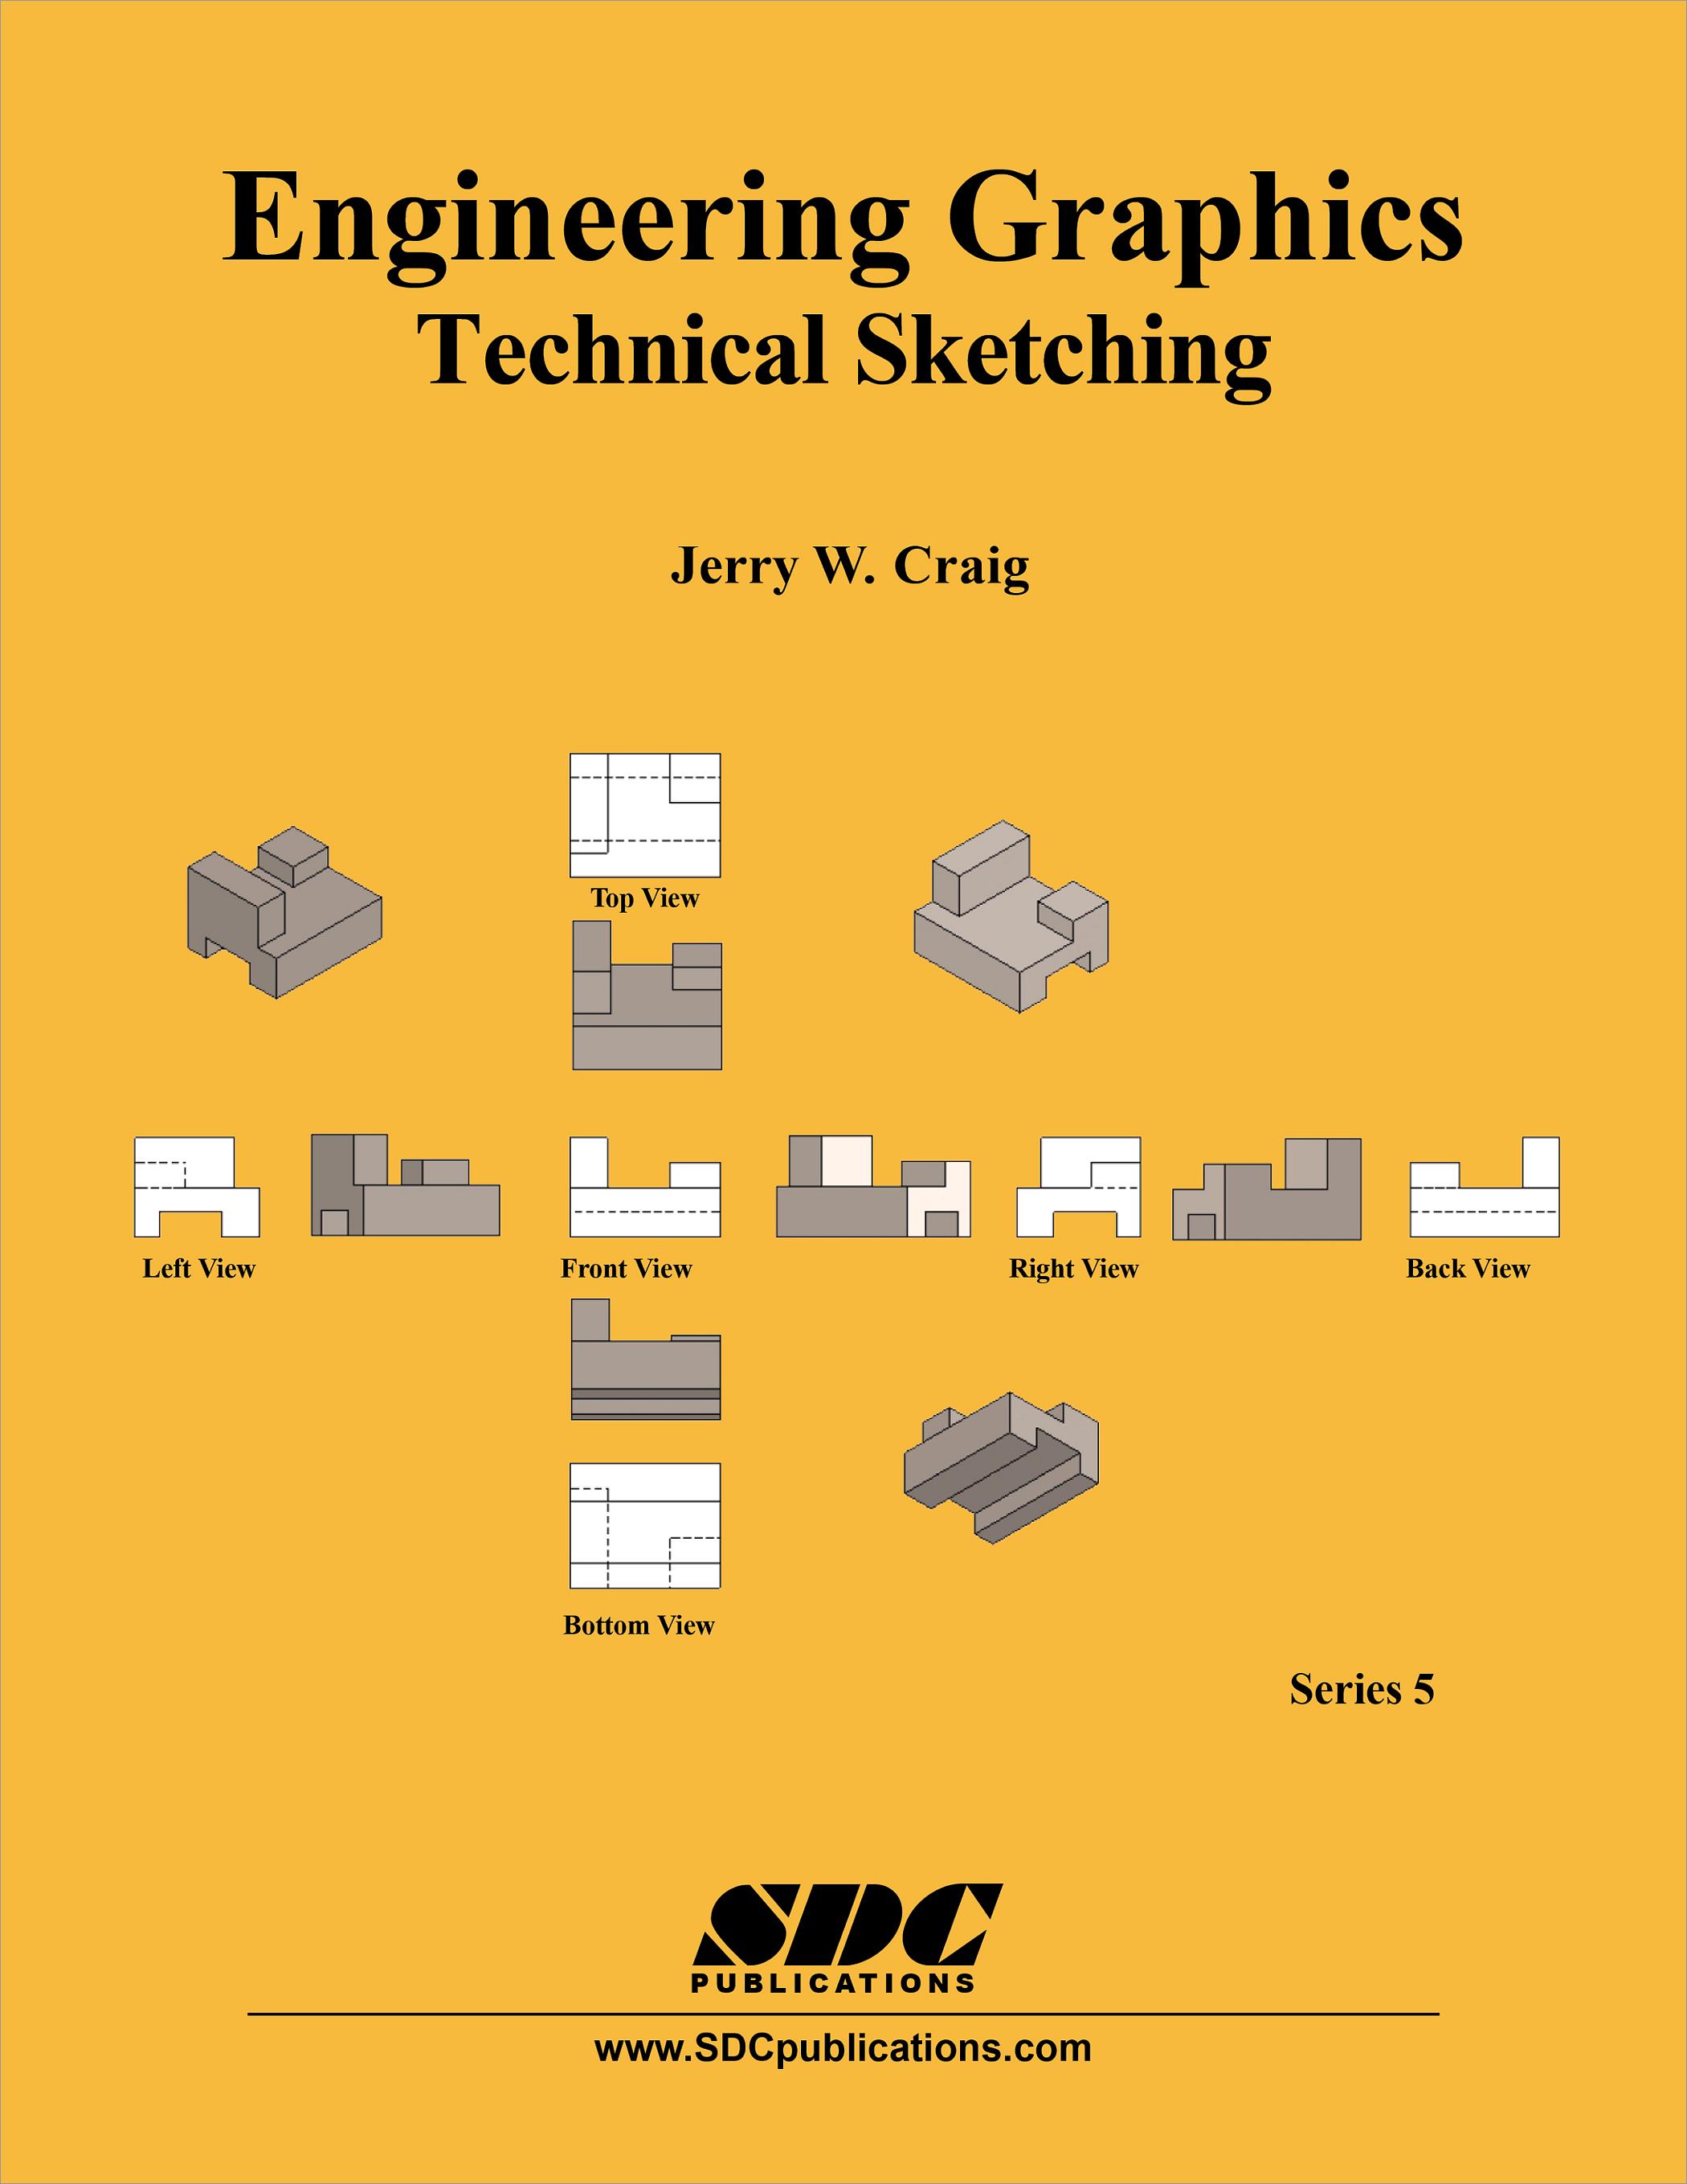 Engineering Graphics Technical Sketching Series 5, Book, ISBN 9781